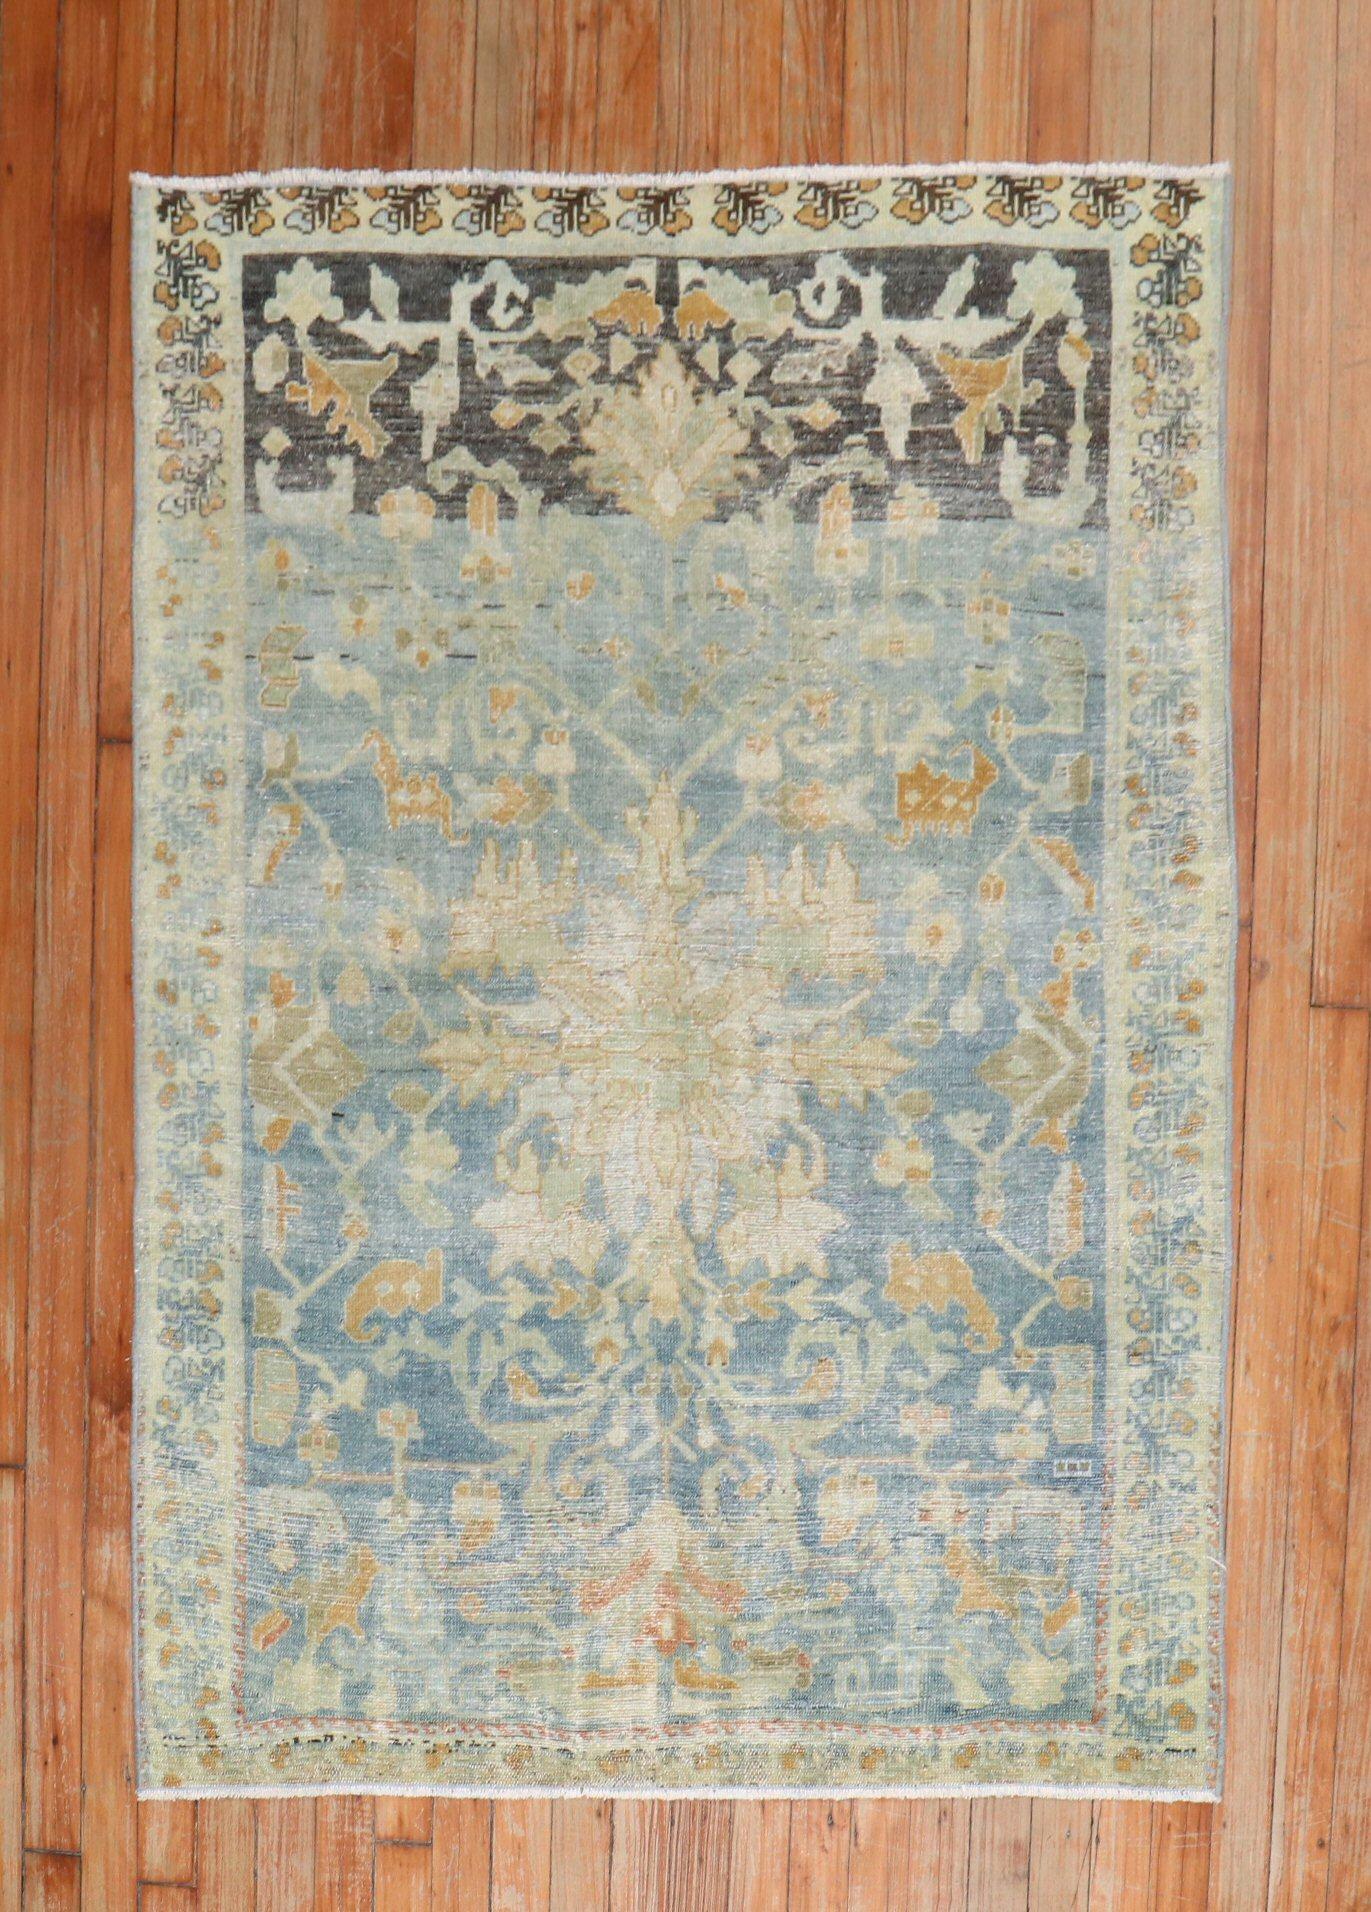 A throw size early 20th century Persian Malayer rug in blue, charcoal, and apricot

Measures: 3'5